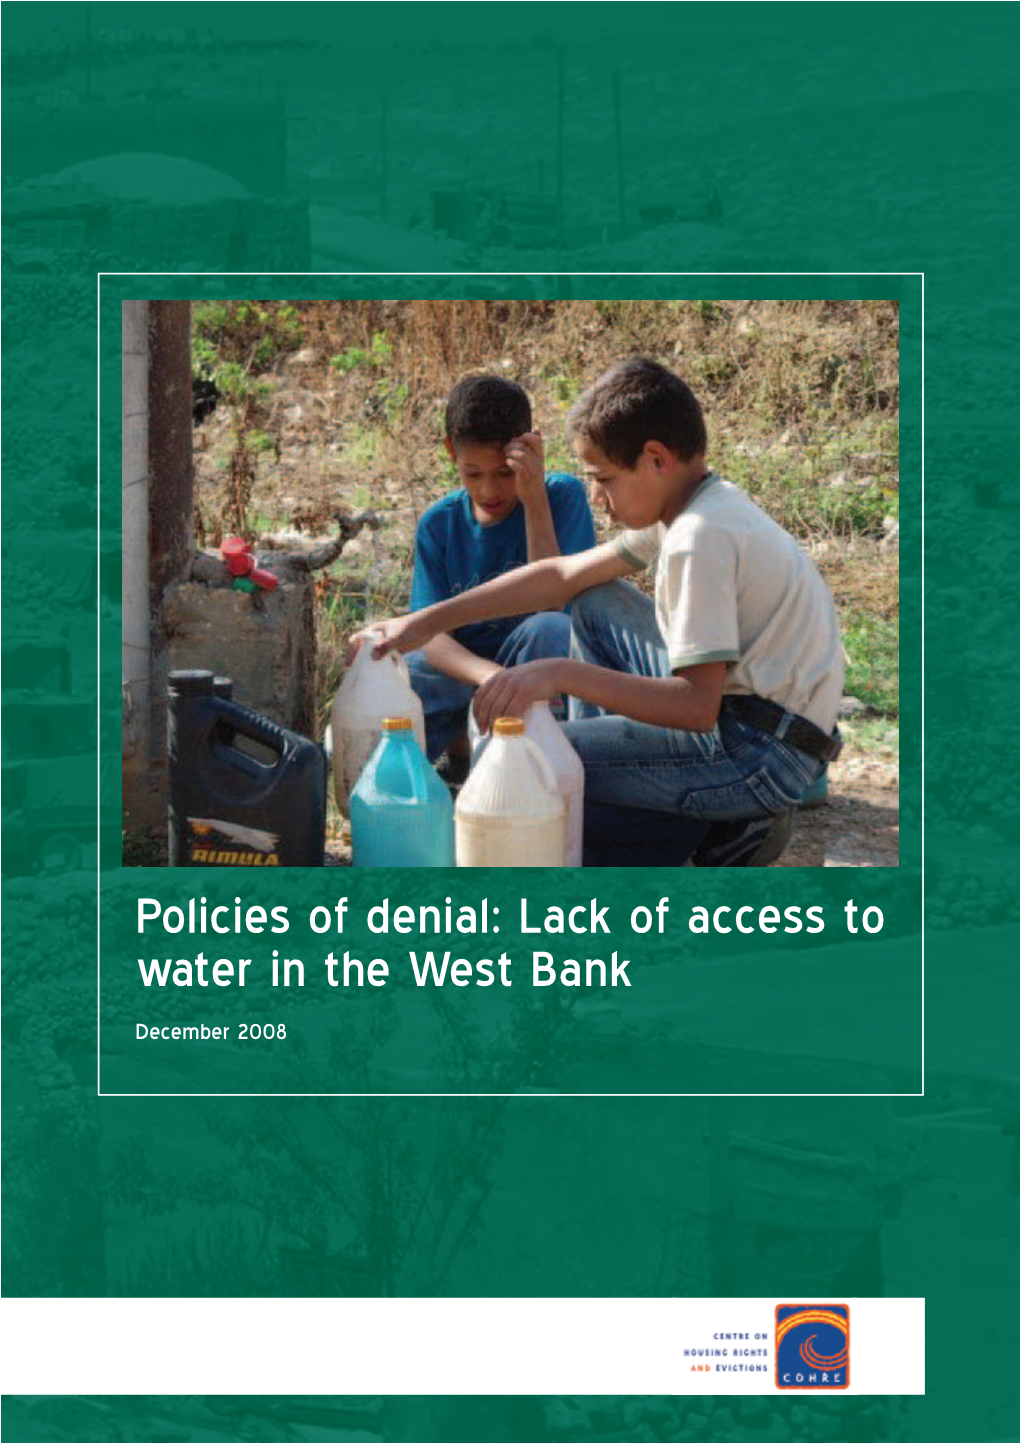 Policies of Denial: Lack of Access to Water in the West Bank December 2008